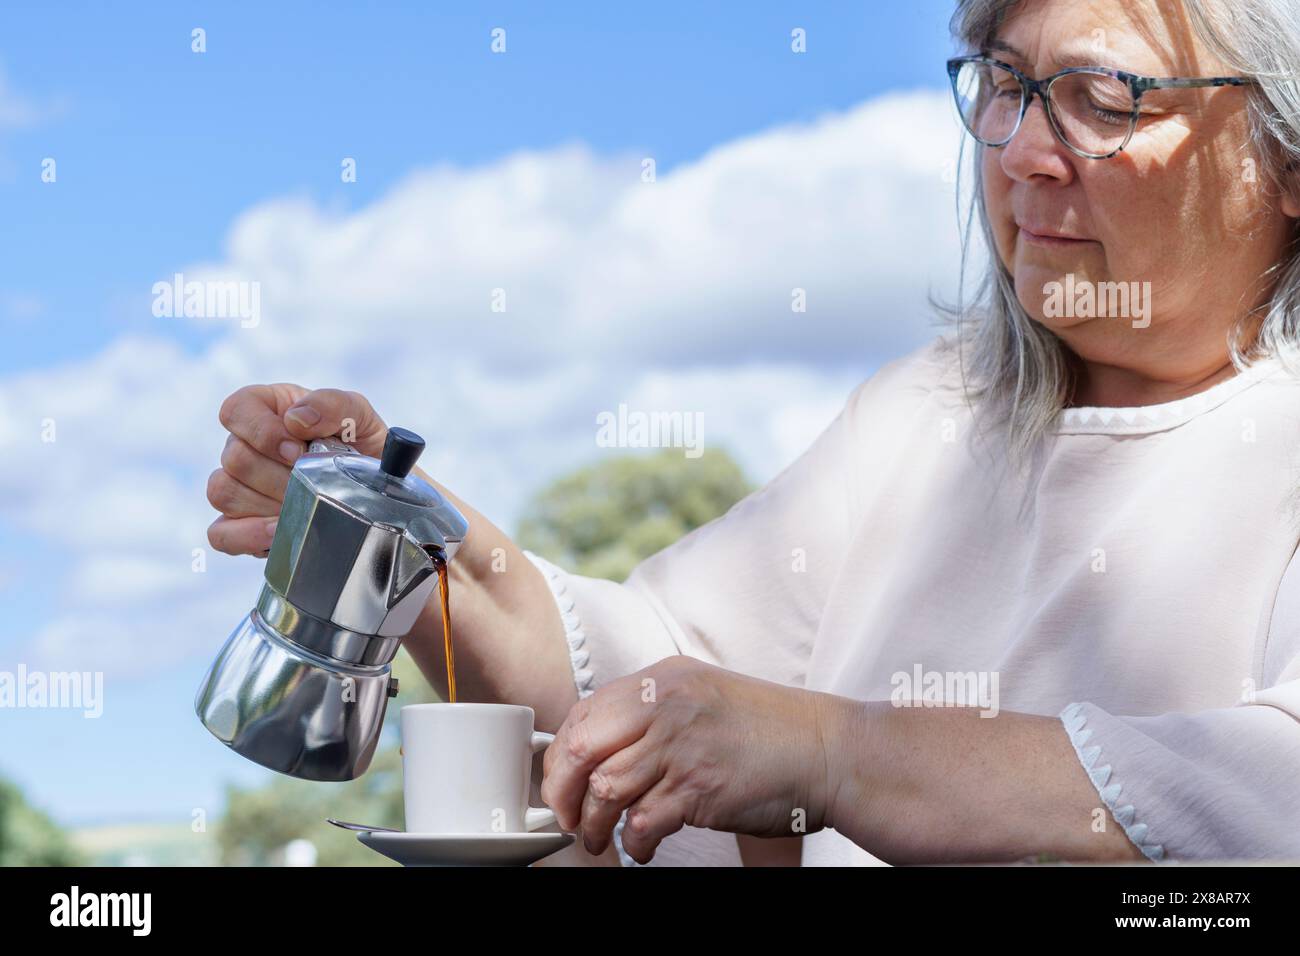 close-up of a woman serving herself coffee at a table in a field with a blue sky with clouds in the background Stock Photo